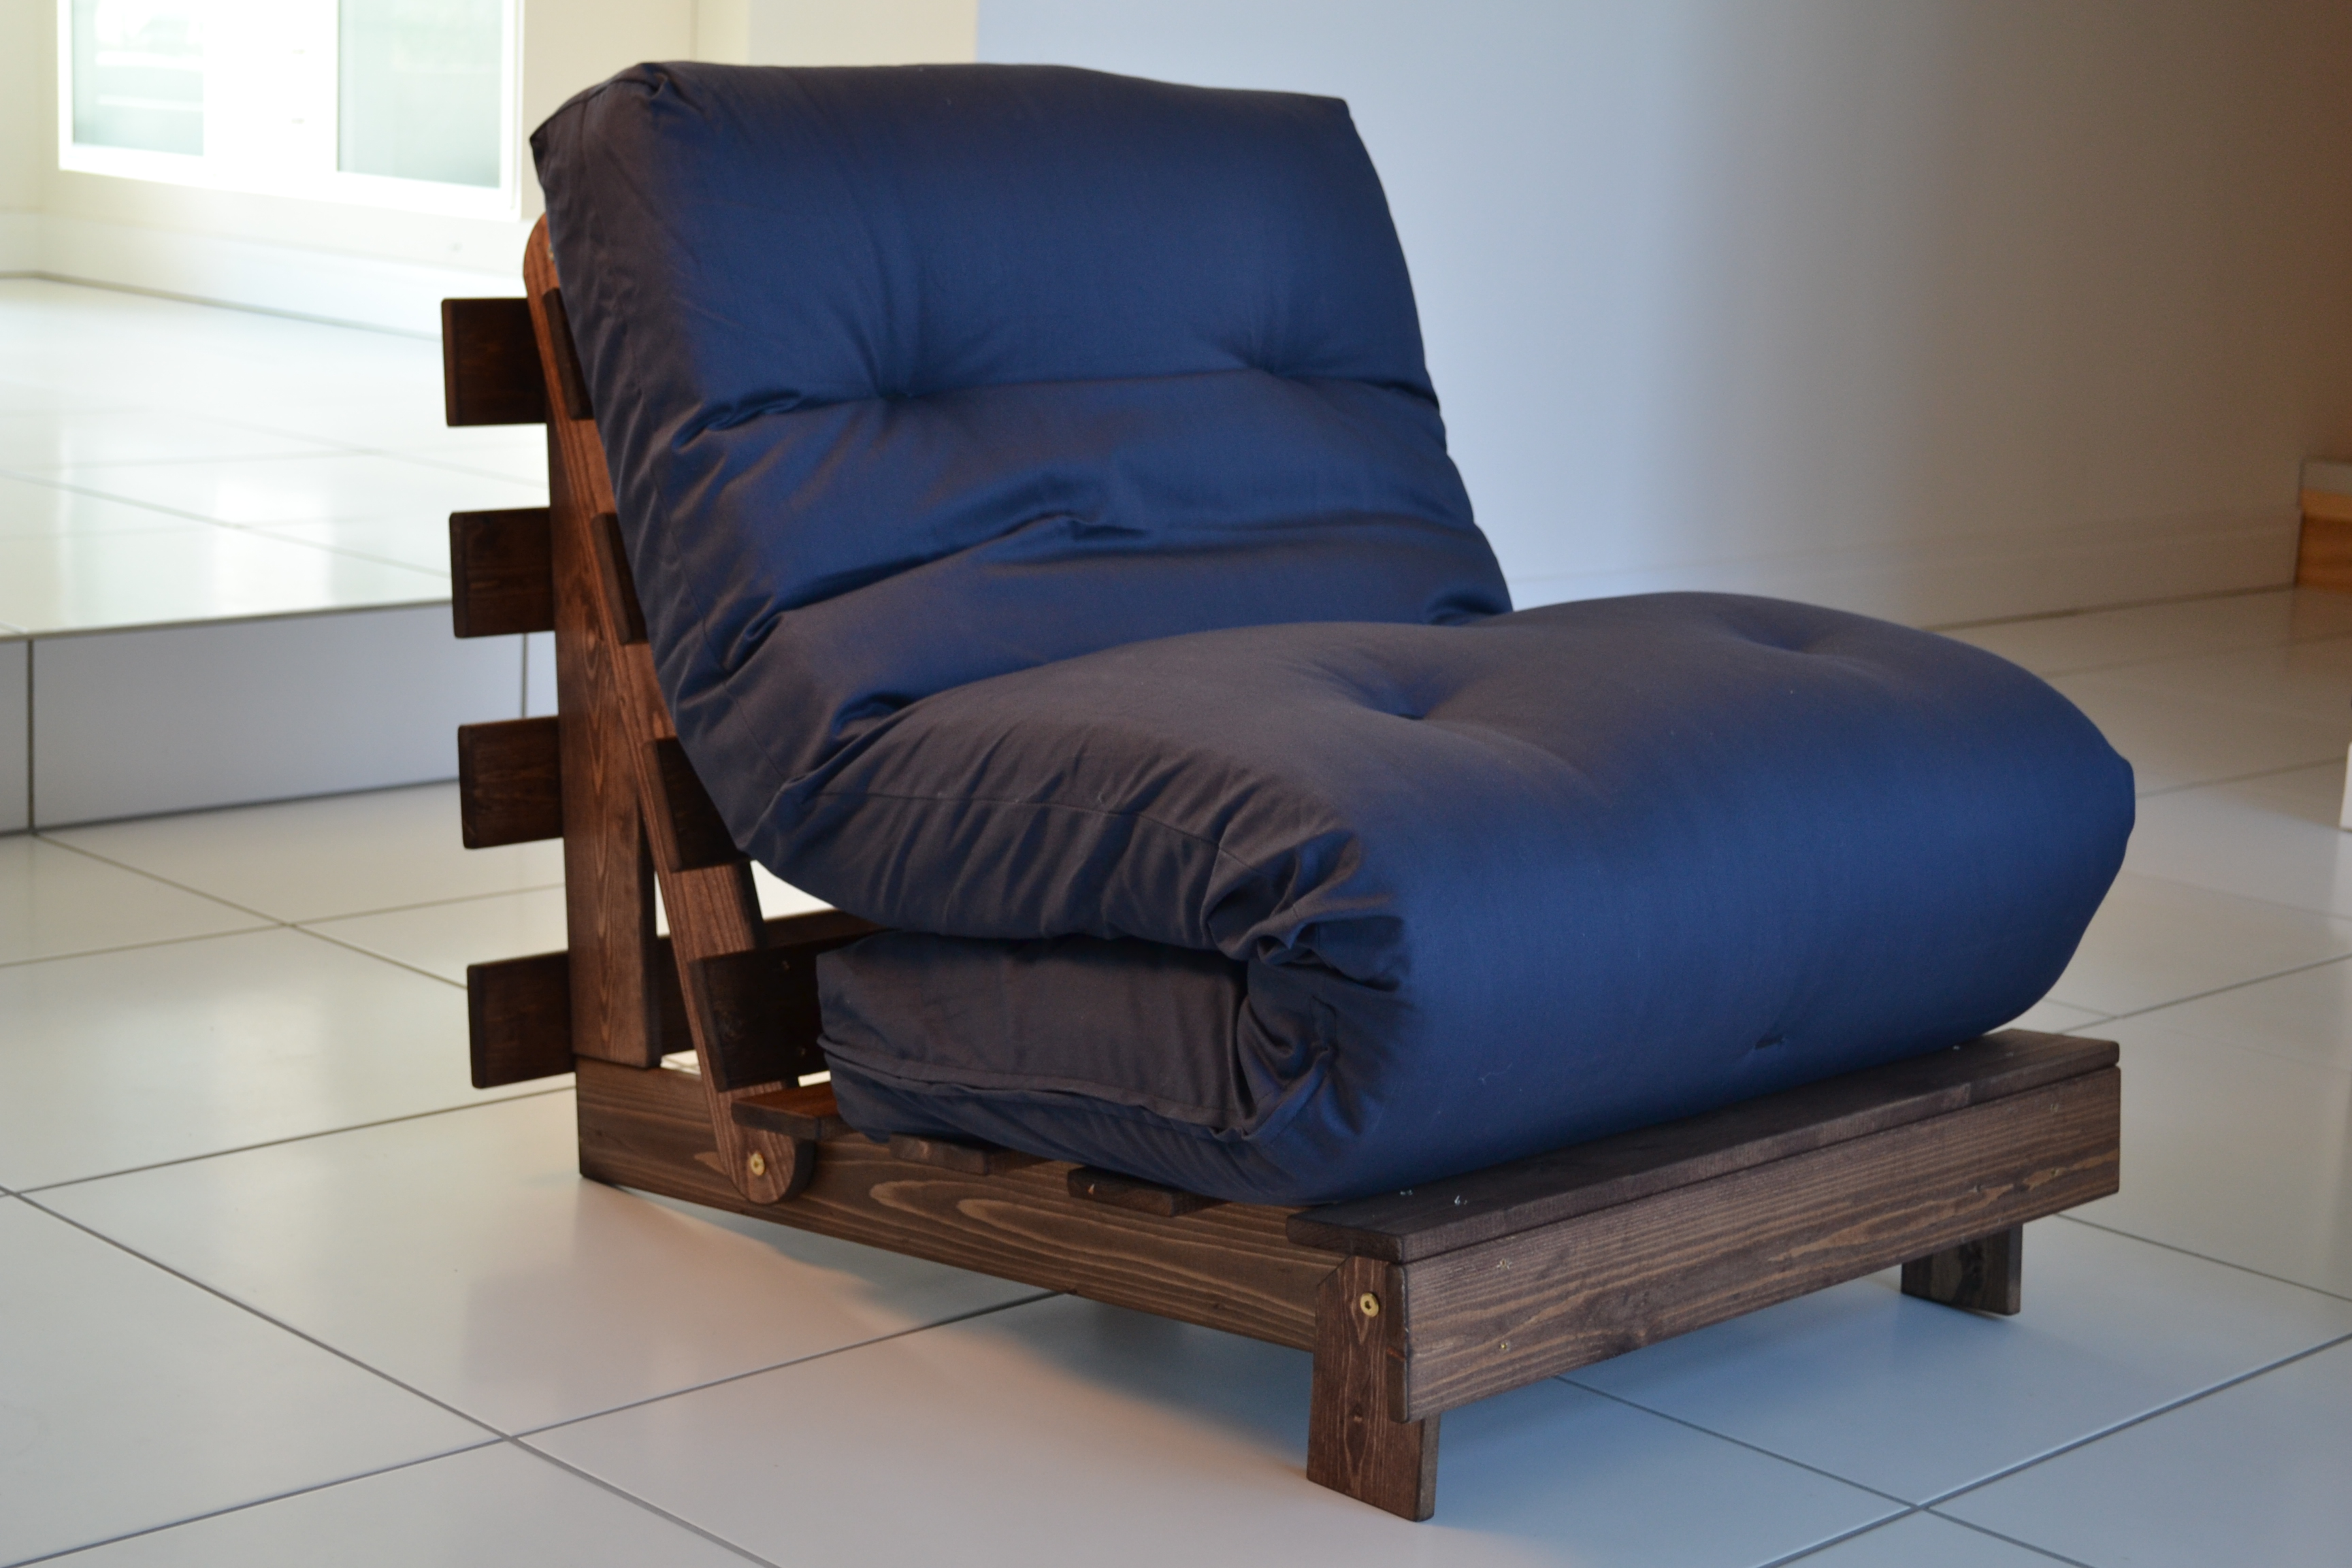 A blue futon folded up onto a brown DIY wood pallet chair.